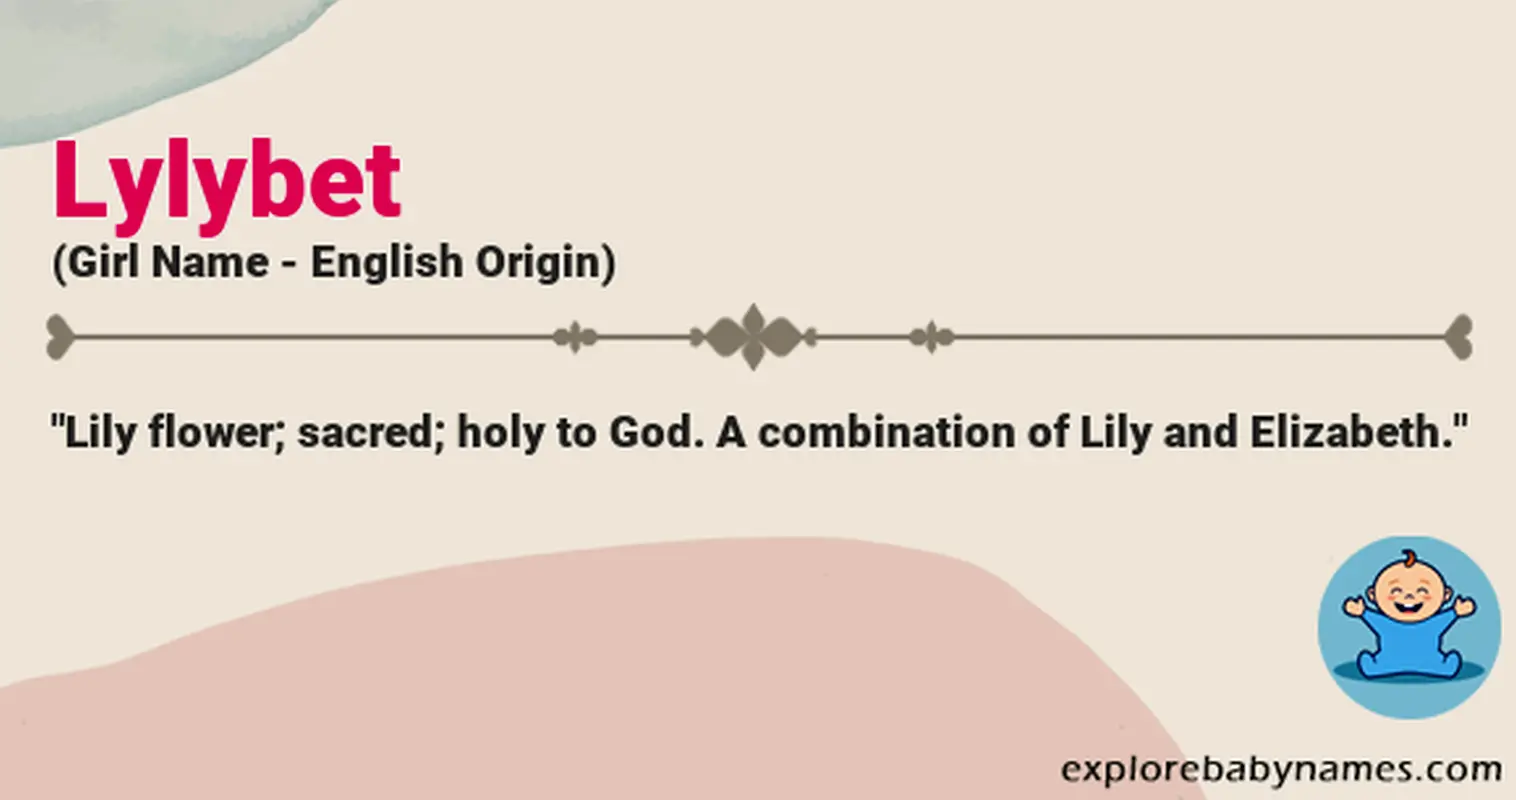 Meaning of Lylybet